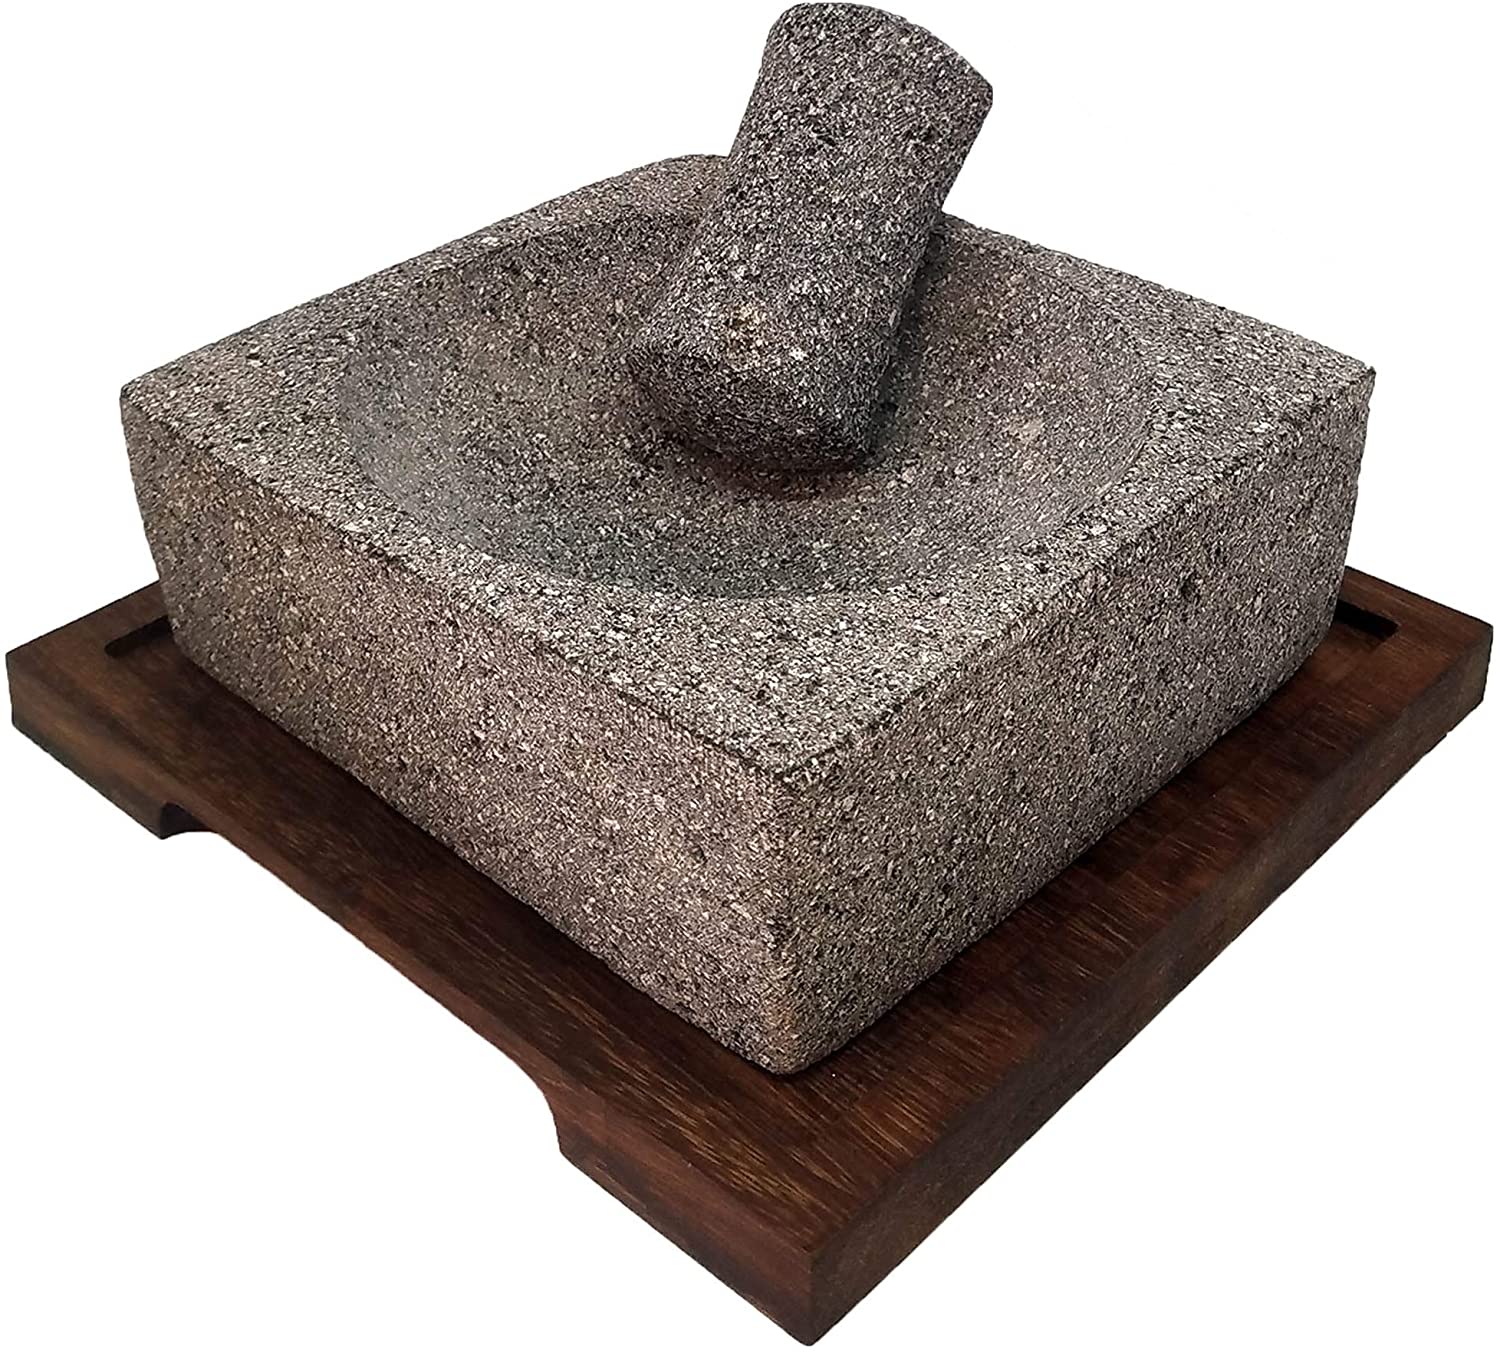 PRODUCTOS DE PIEDRA VOLCANICA / 8'' Square Mortar and Pestle Set with Parota Wood Serving Board / Sturdy and eye-catching, this large square mortar will be a great addition to your kitchen.